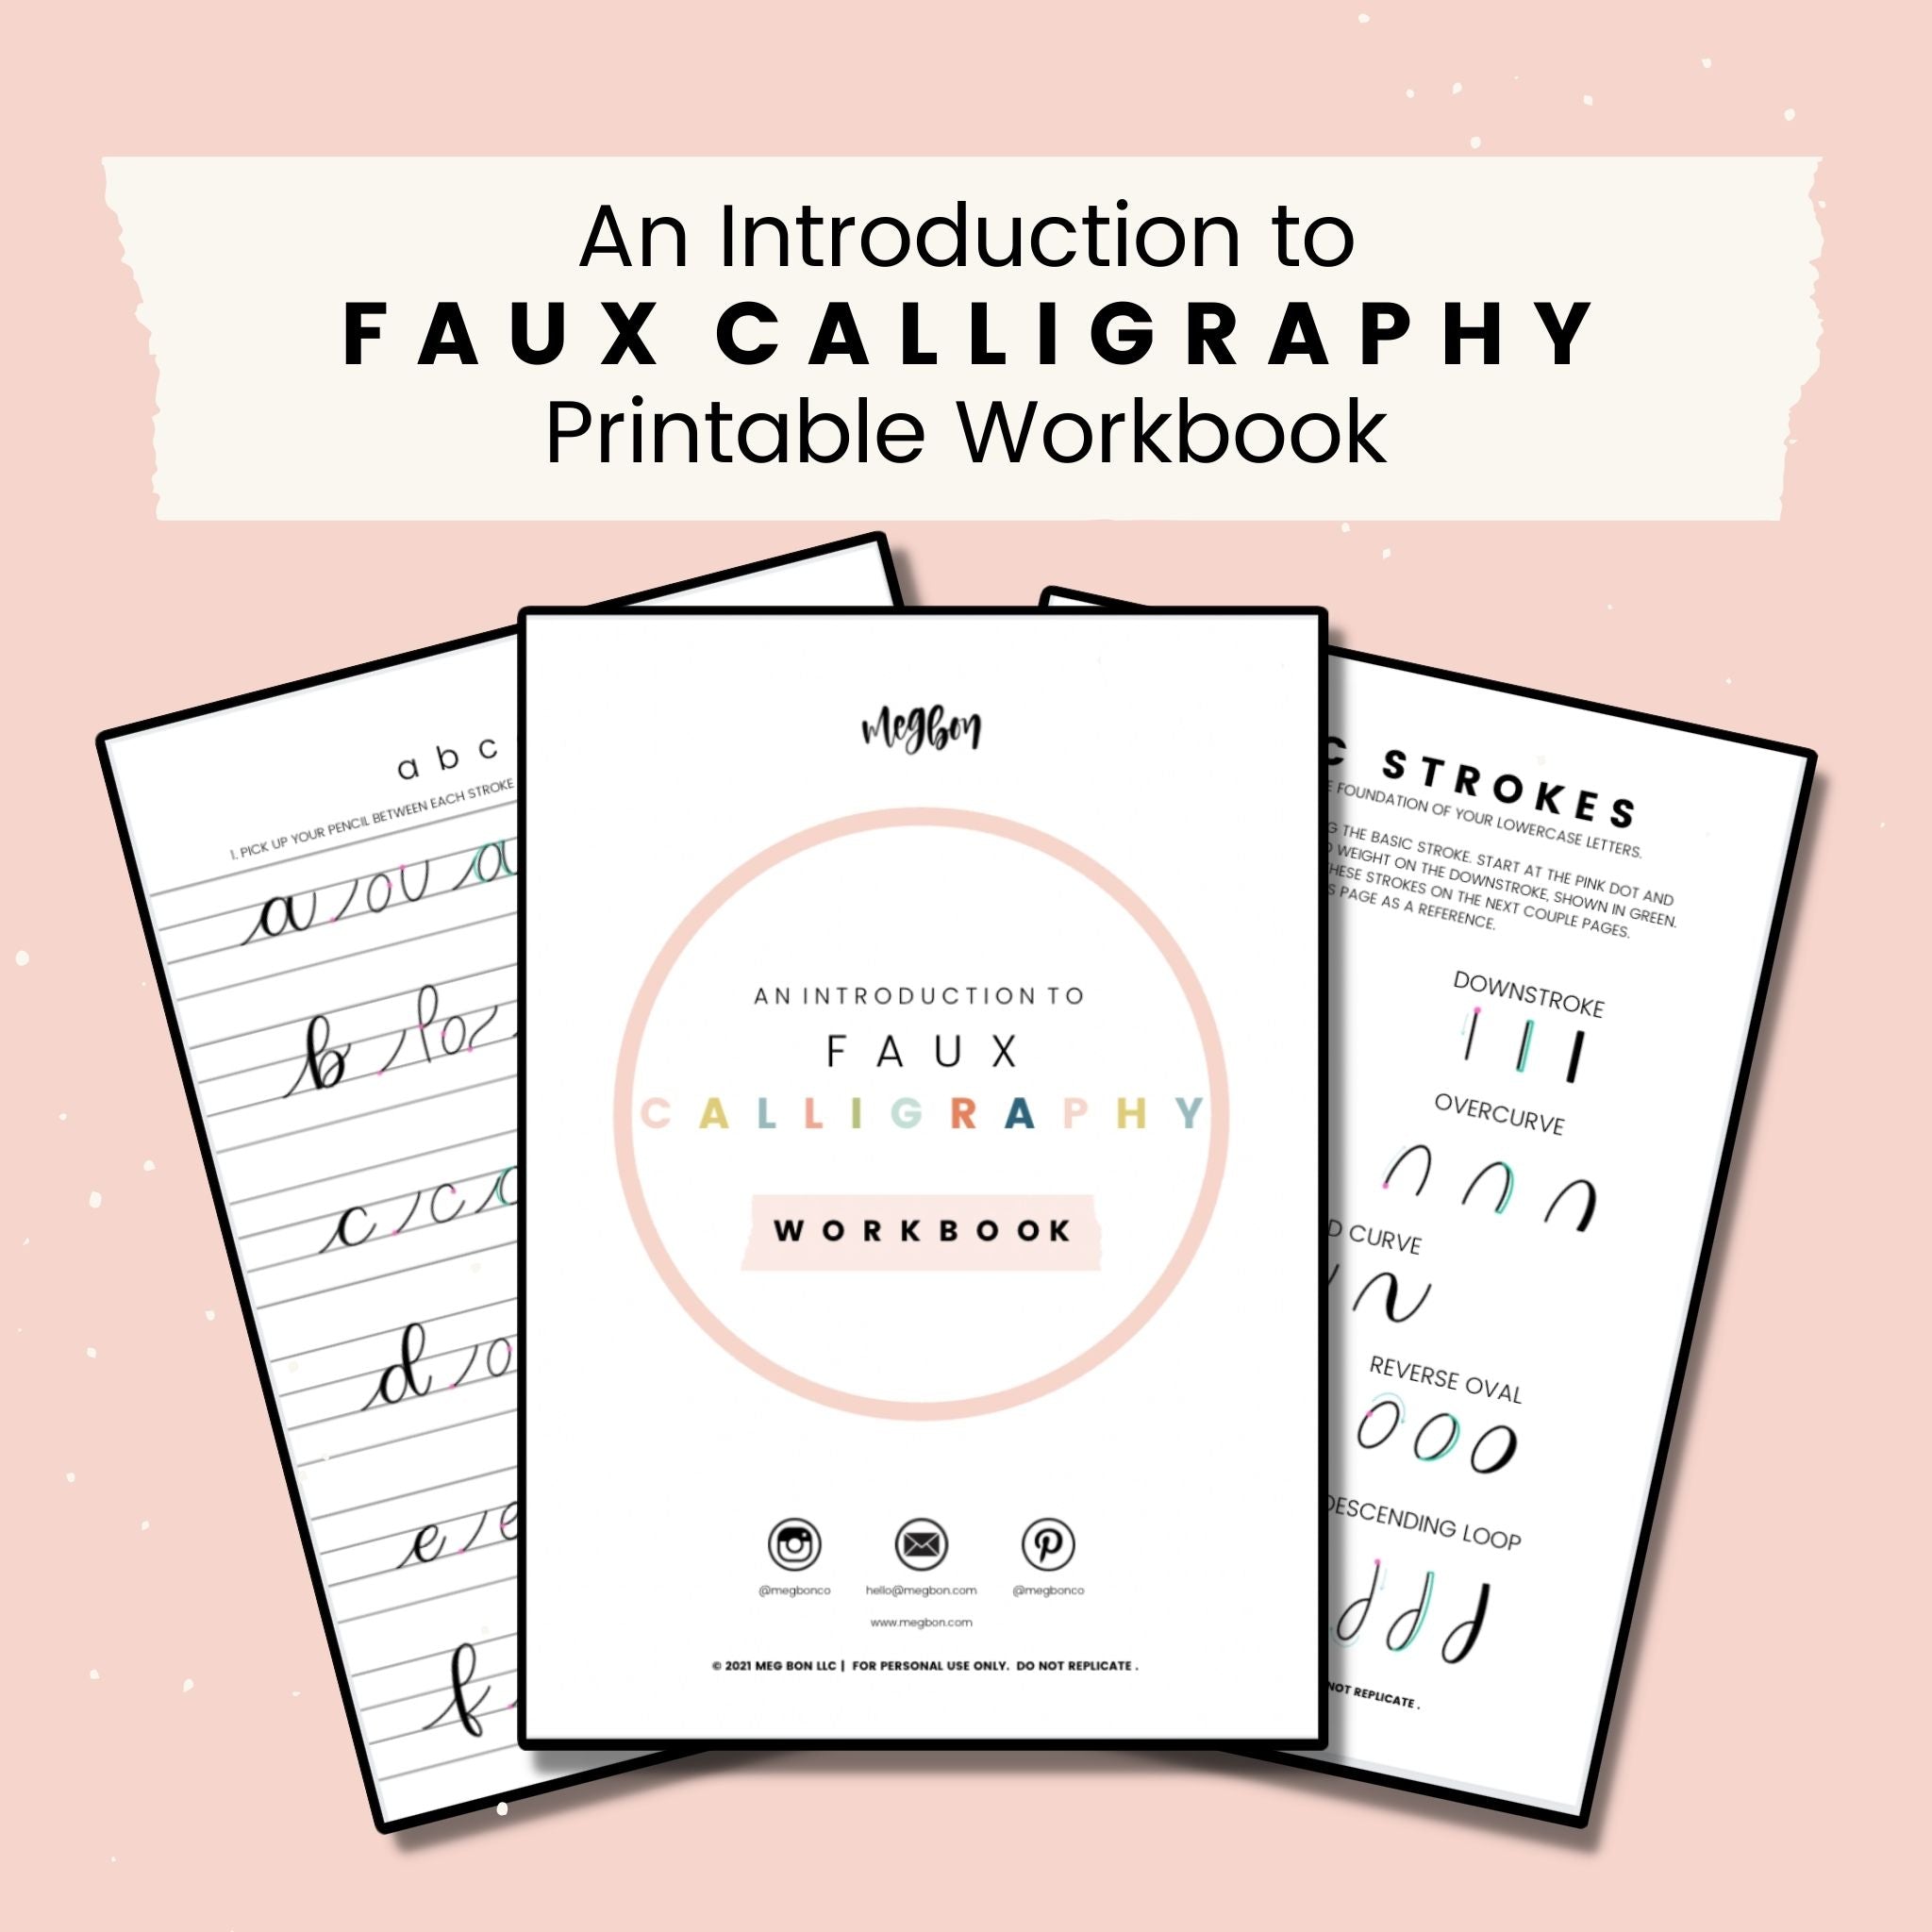 Faux Calligraphy Practice Workbook